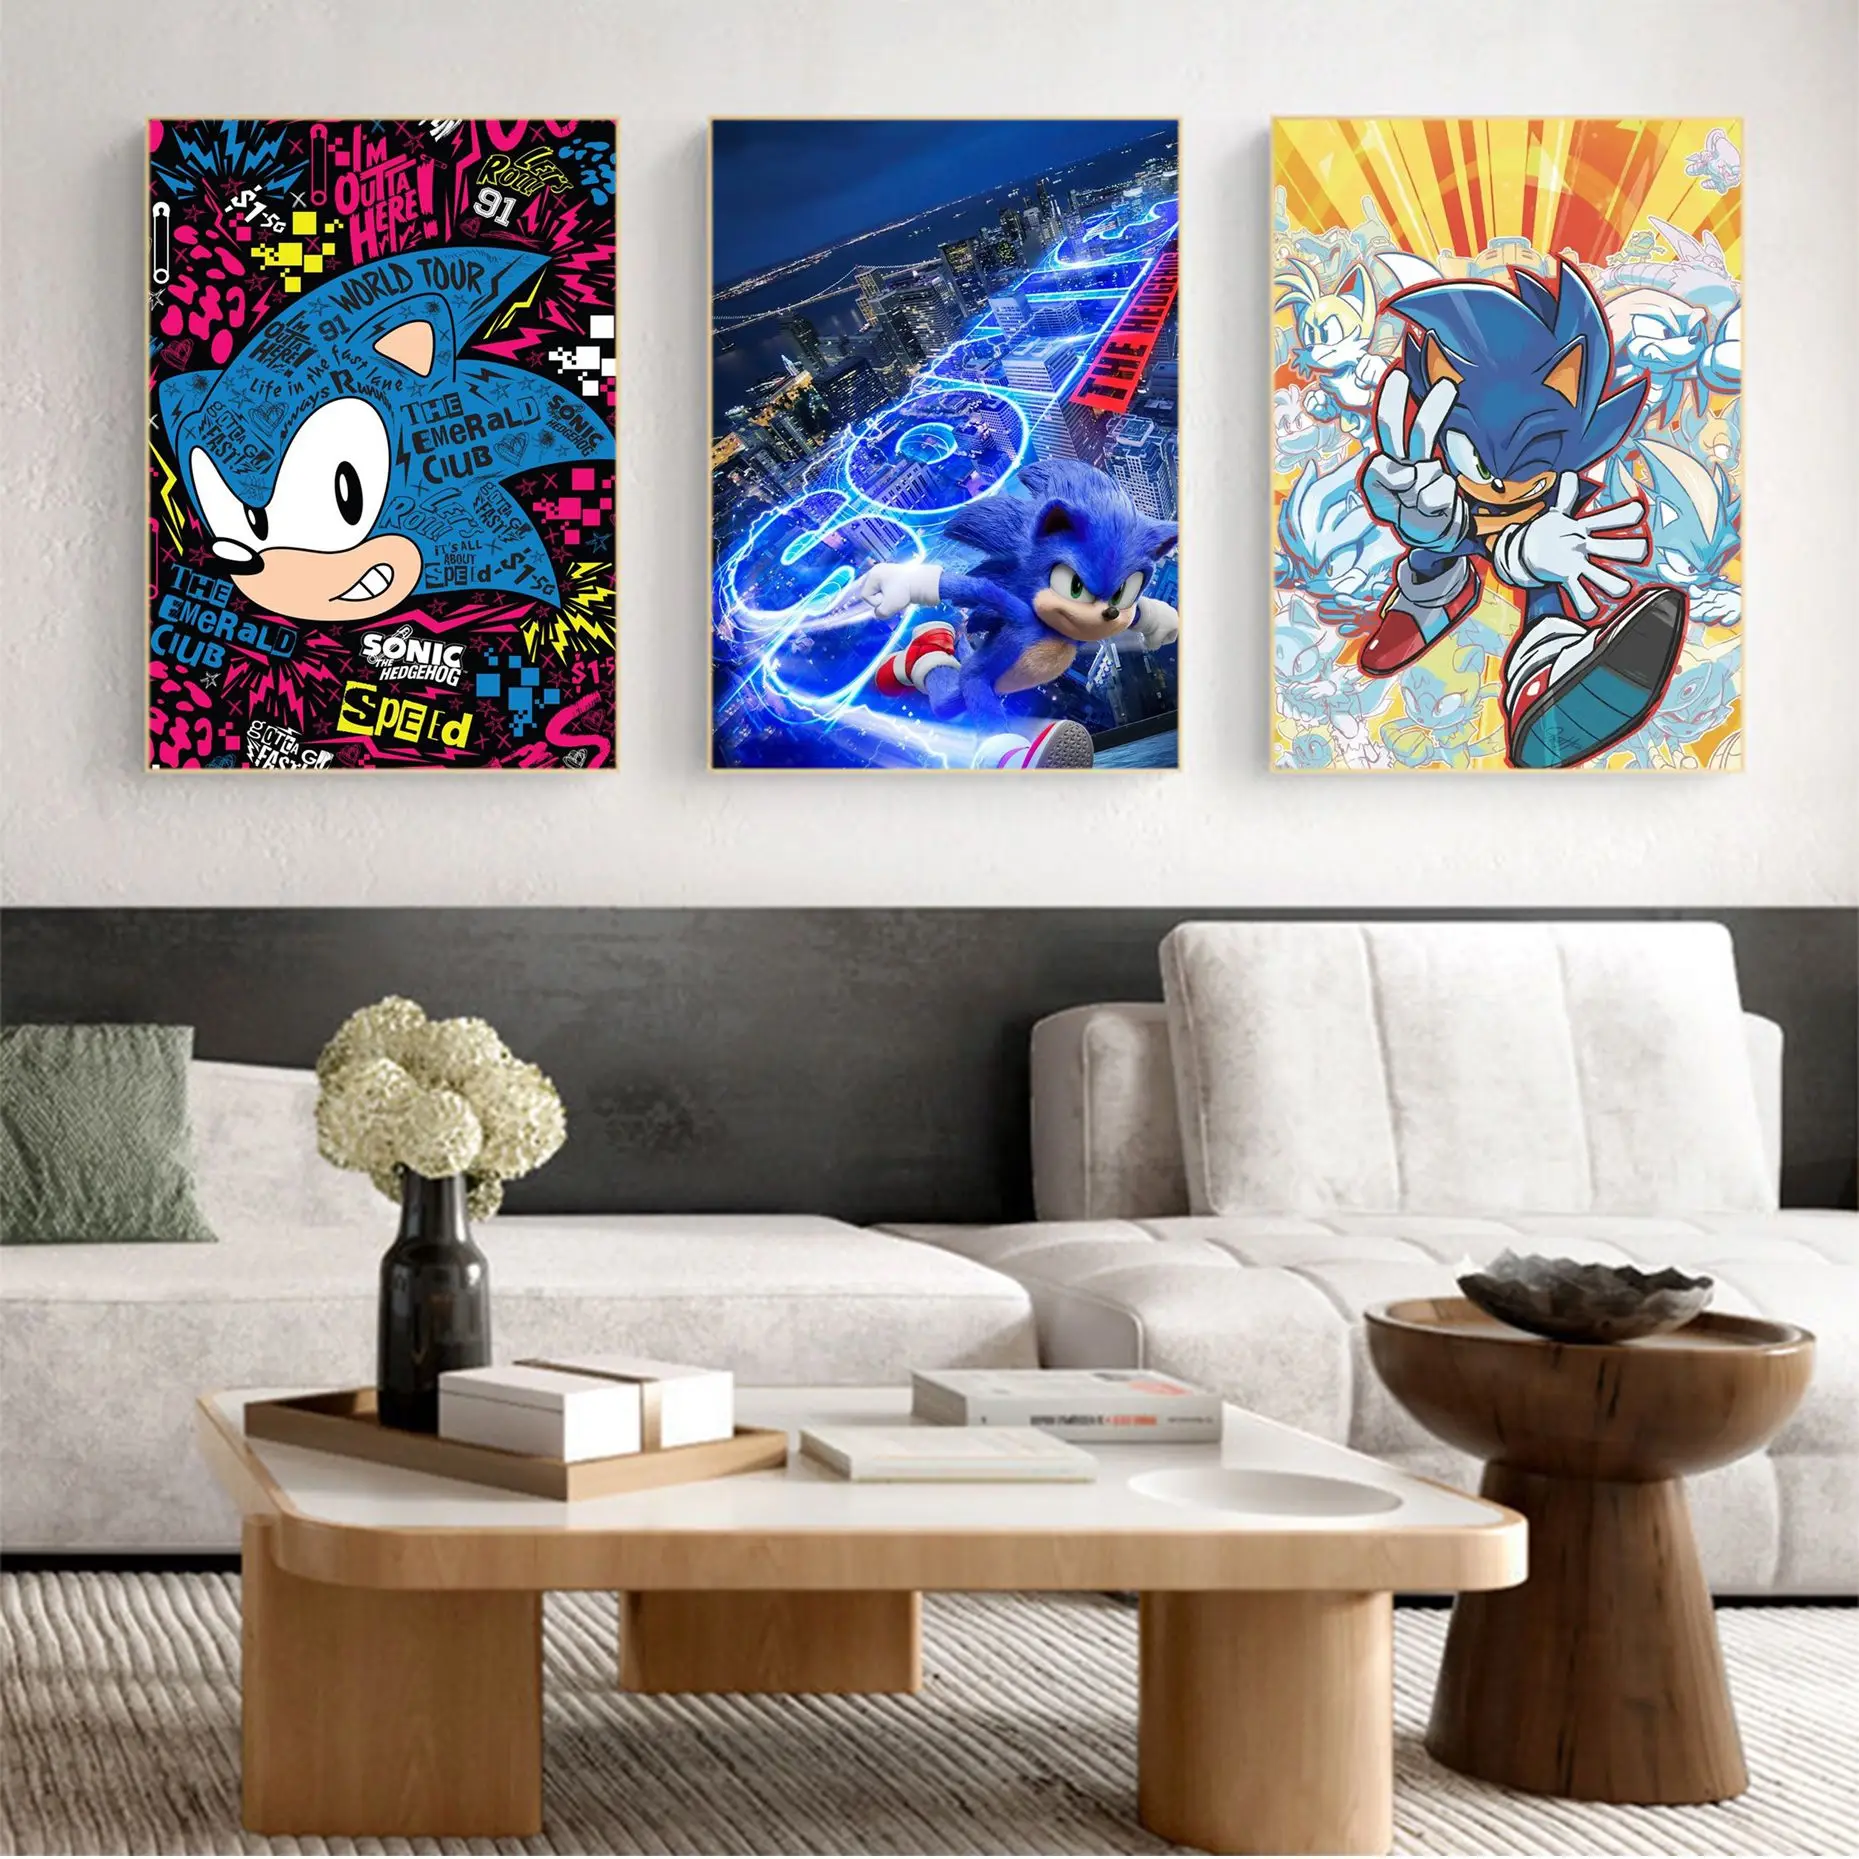 Supersonic-S-Sonic-Game Anime Posters Sticky Fancy Wall Sticker For Living Room Bar Decoration Decor Art Wall Stickers